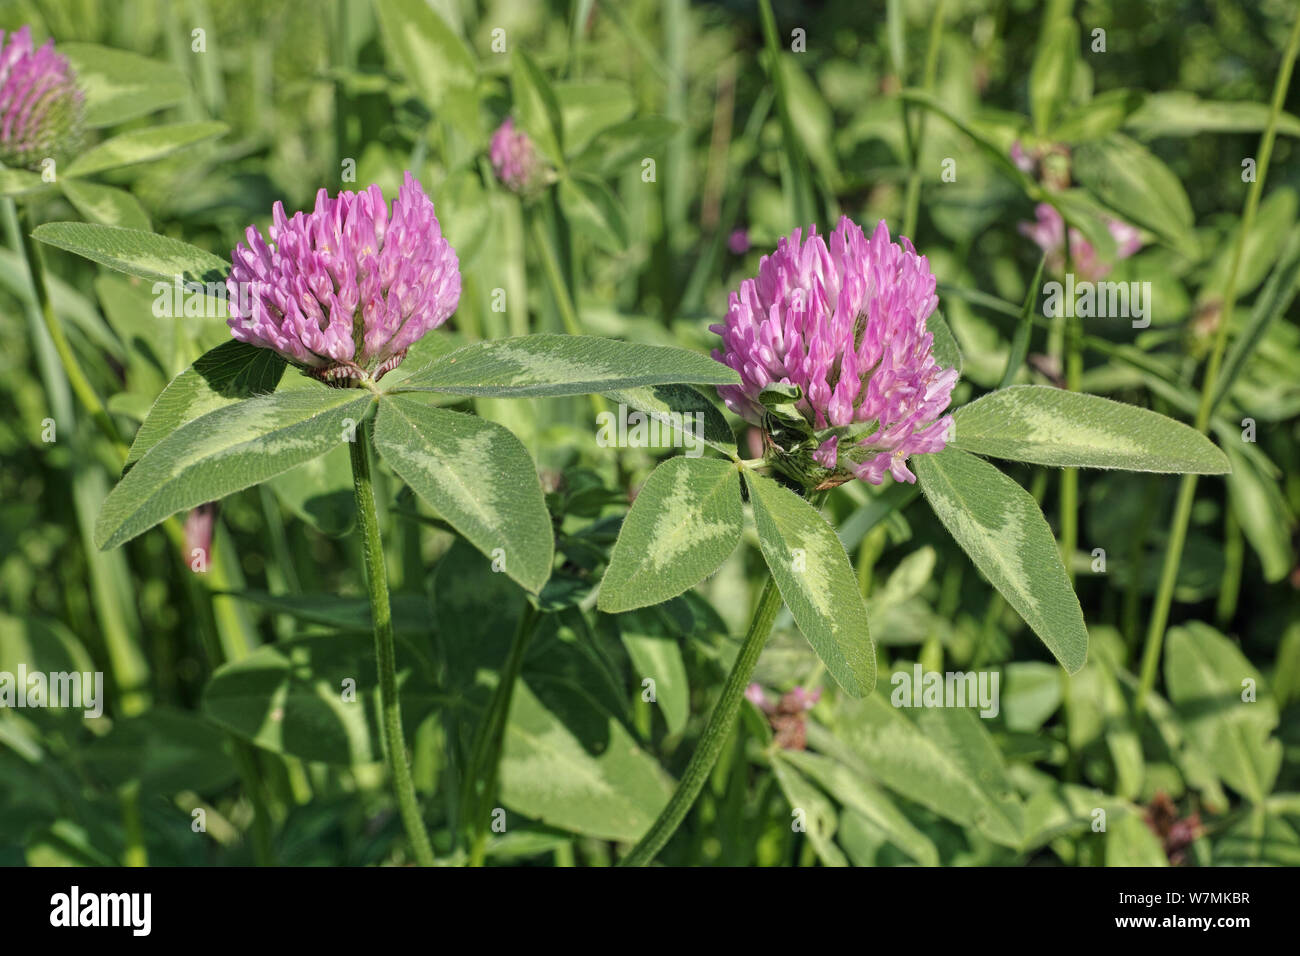 detail of the flower heads and leaves of red clover in blooming, springtime Stock Photo